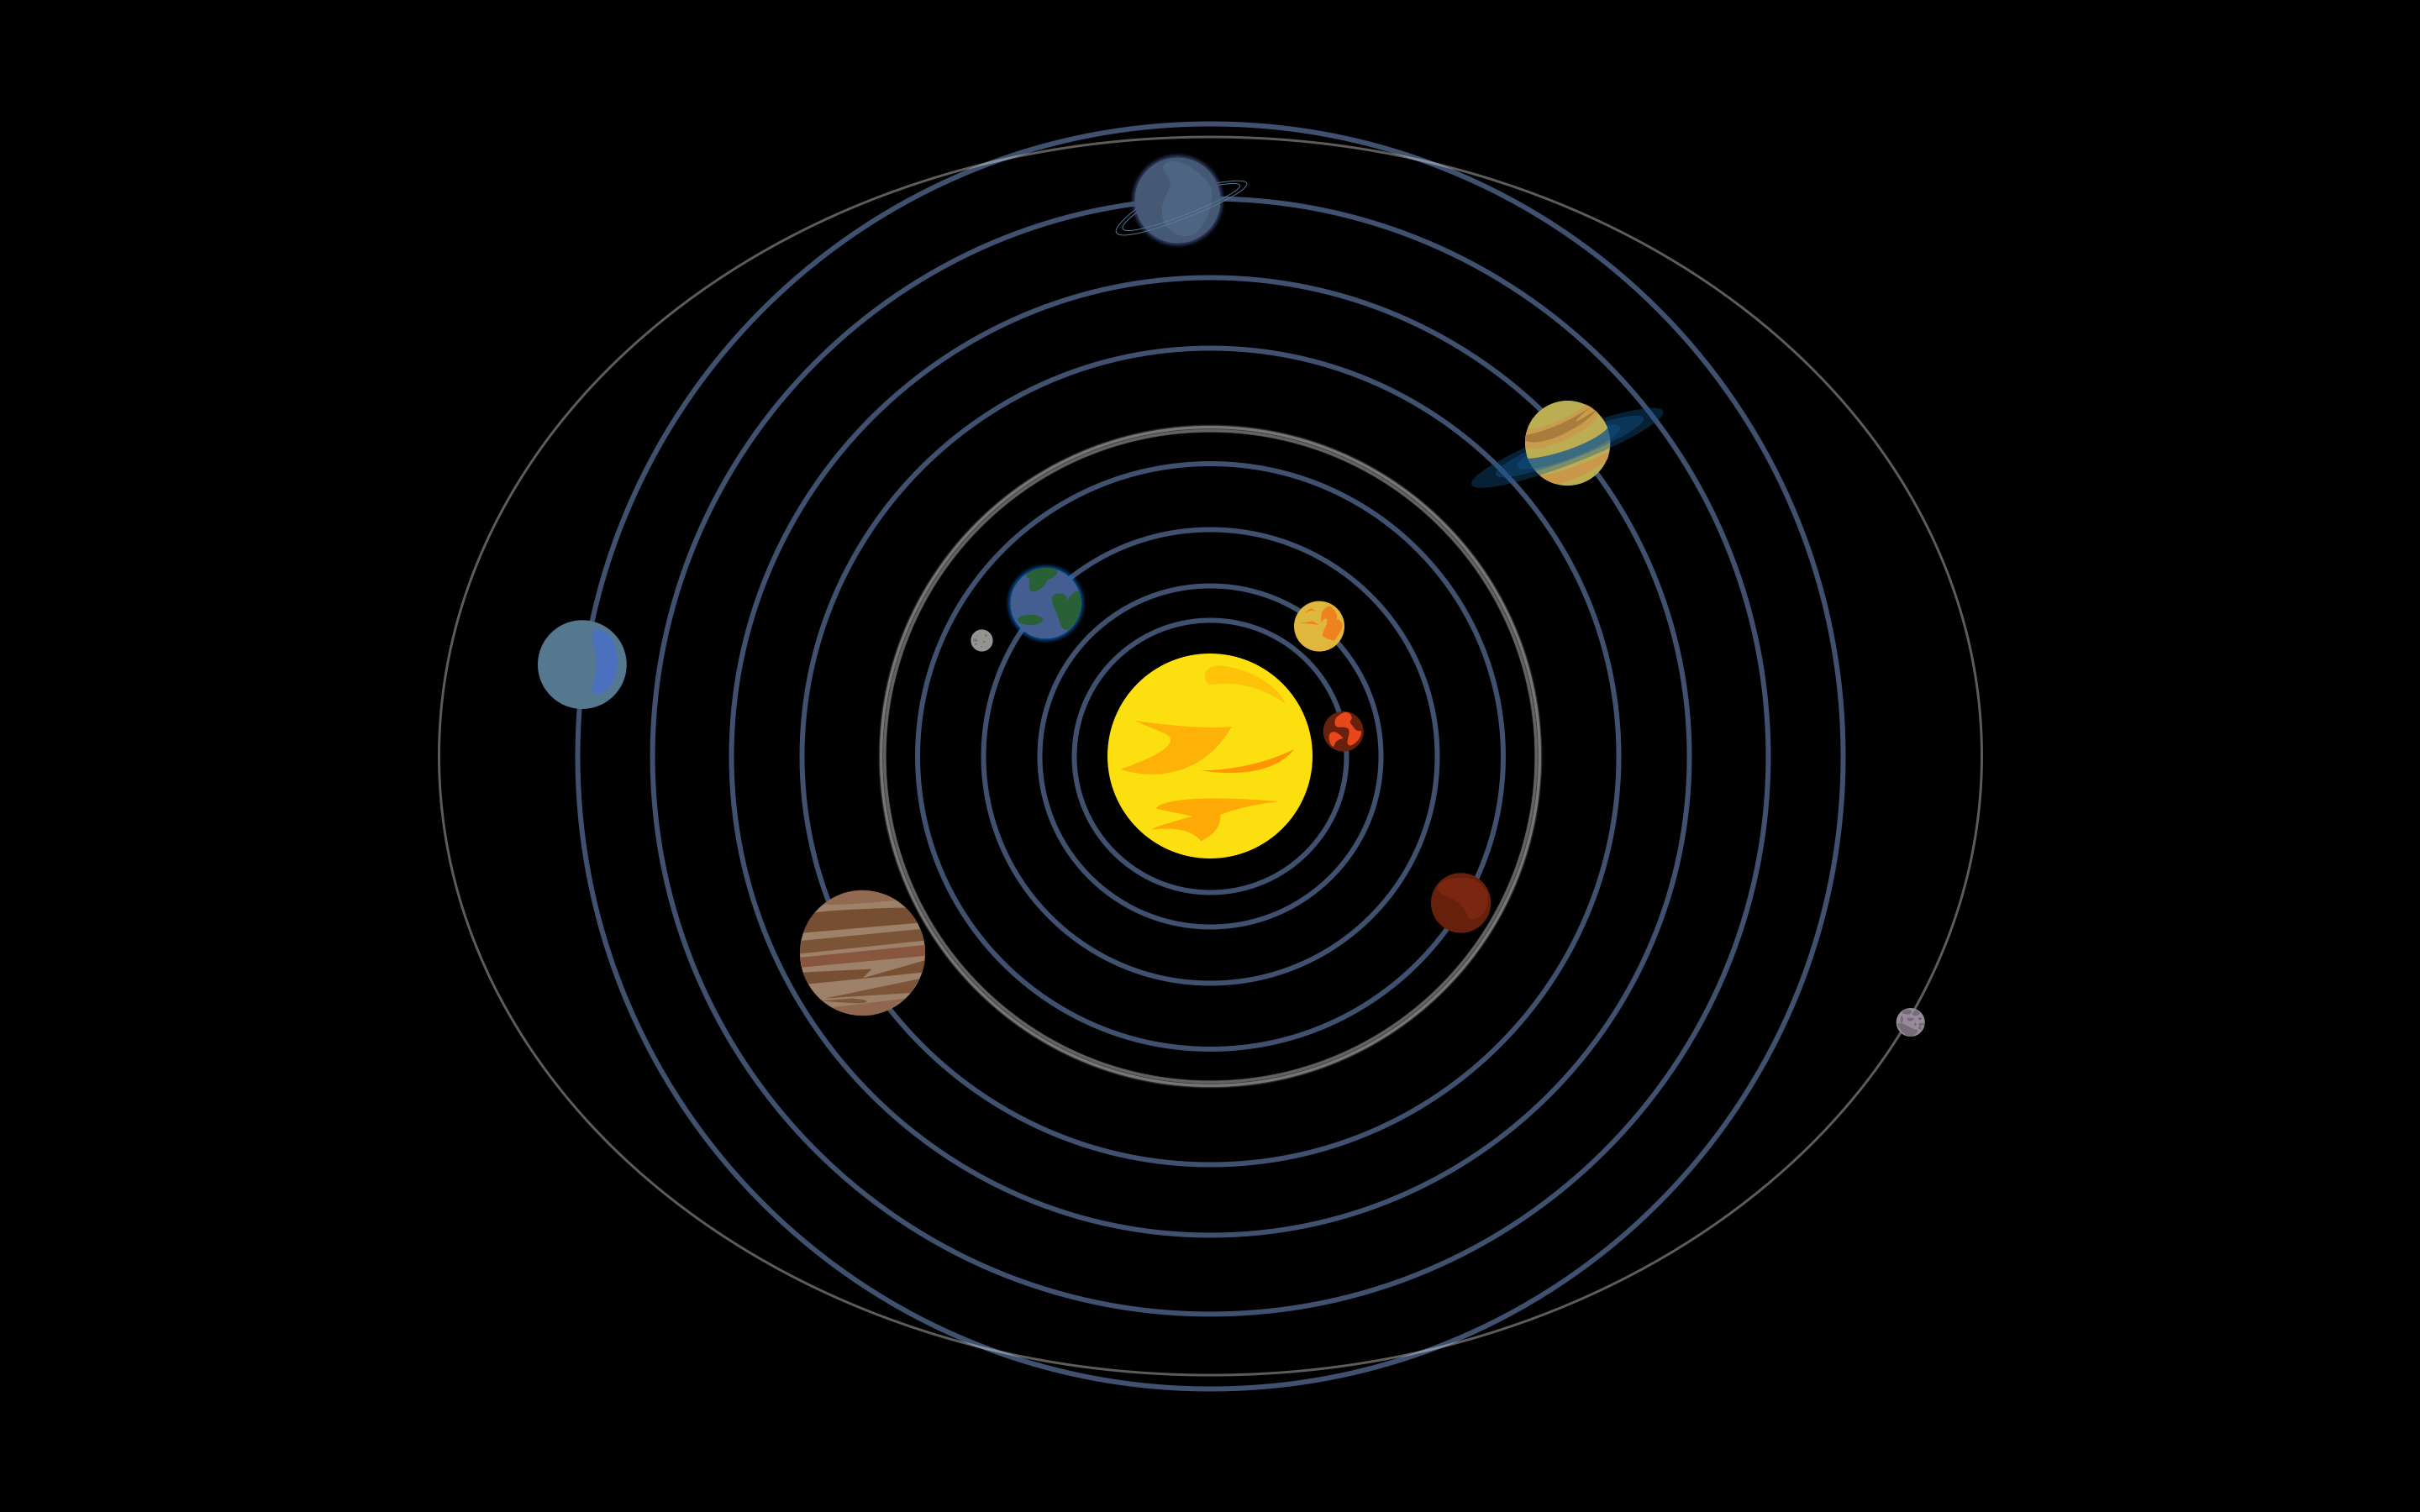 Moving Solar System Wallpapers - Top Free Moving Solar System